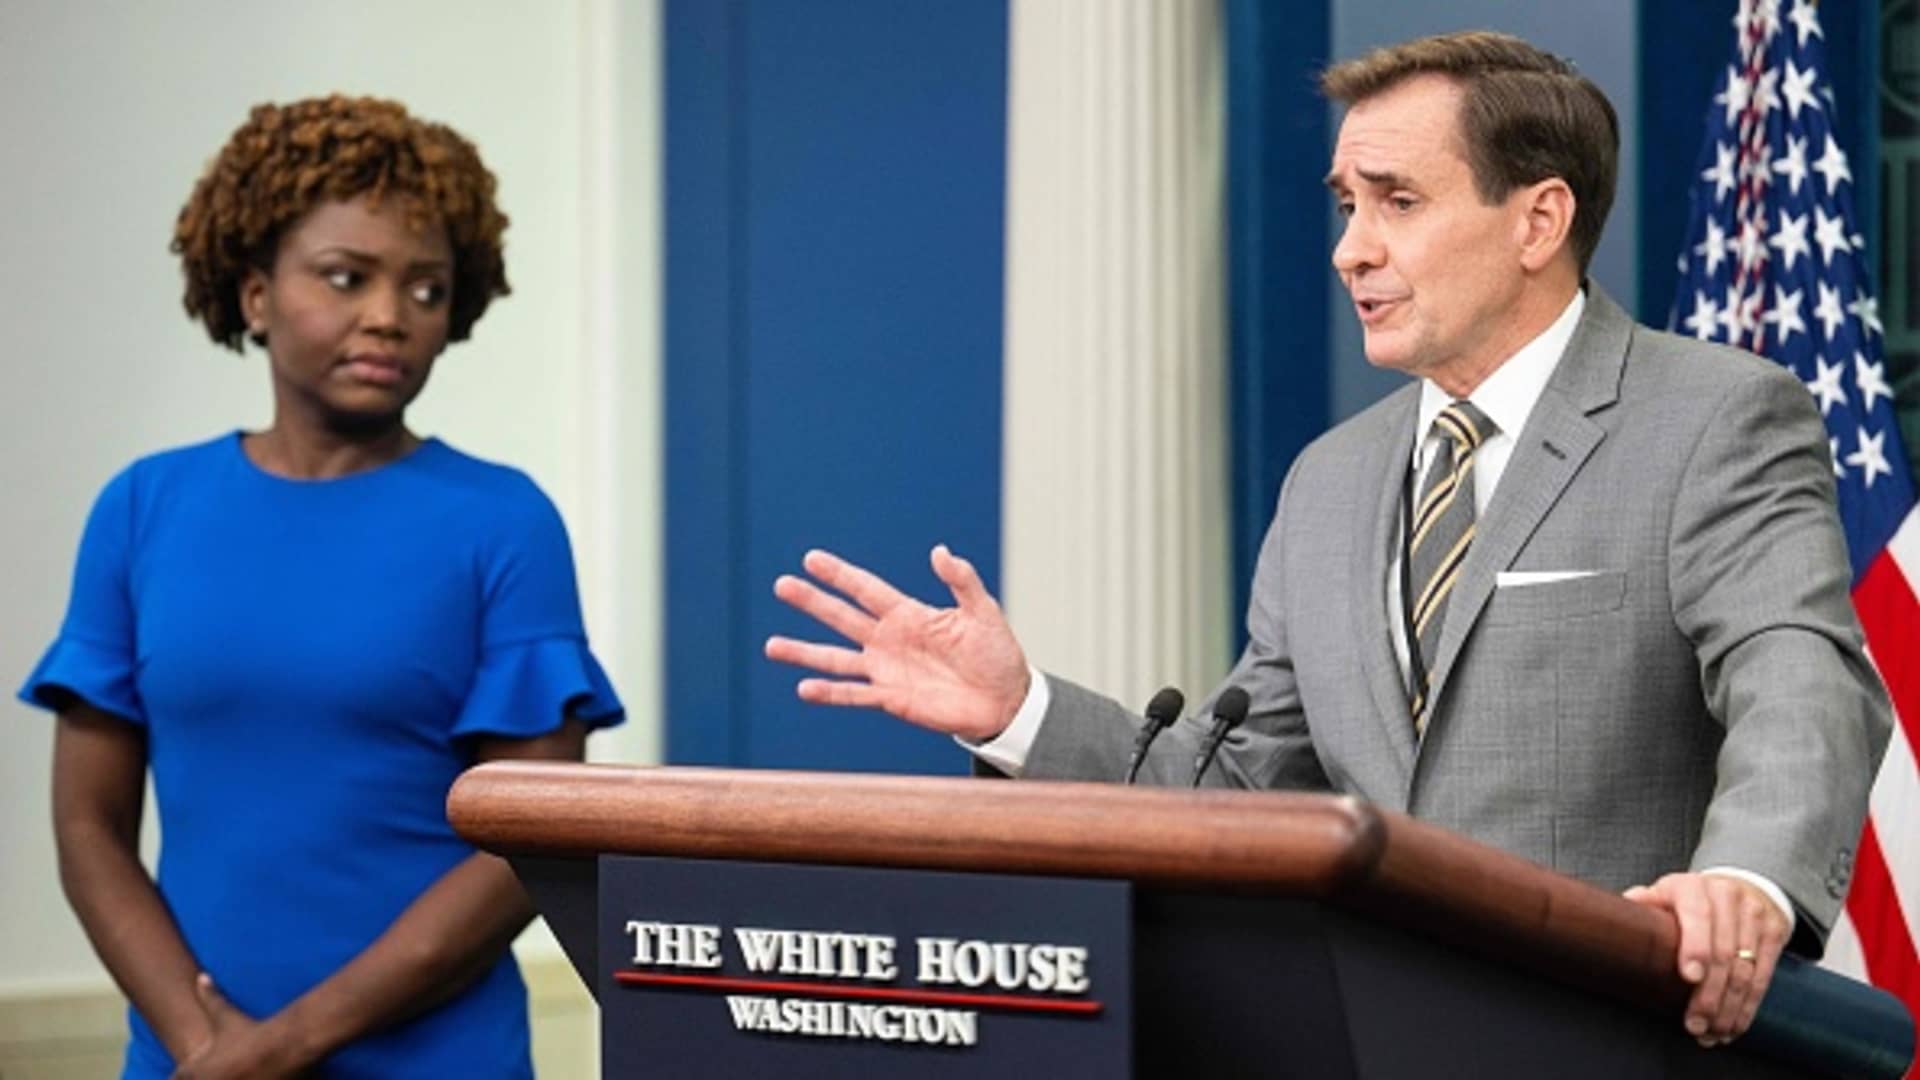 White House Press Secretary Karine Jean-Pierre (L) listens as National Security Council Coordinator for Strategic Communications John Kirby speaks during the daily briefing in the James S Brady Press Briefing Room of the White House in Washington, DC, on August 1, 2022.